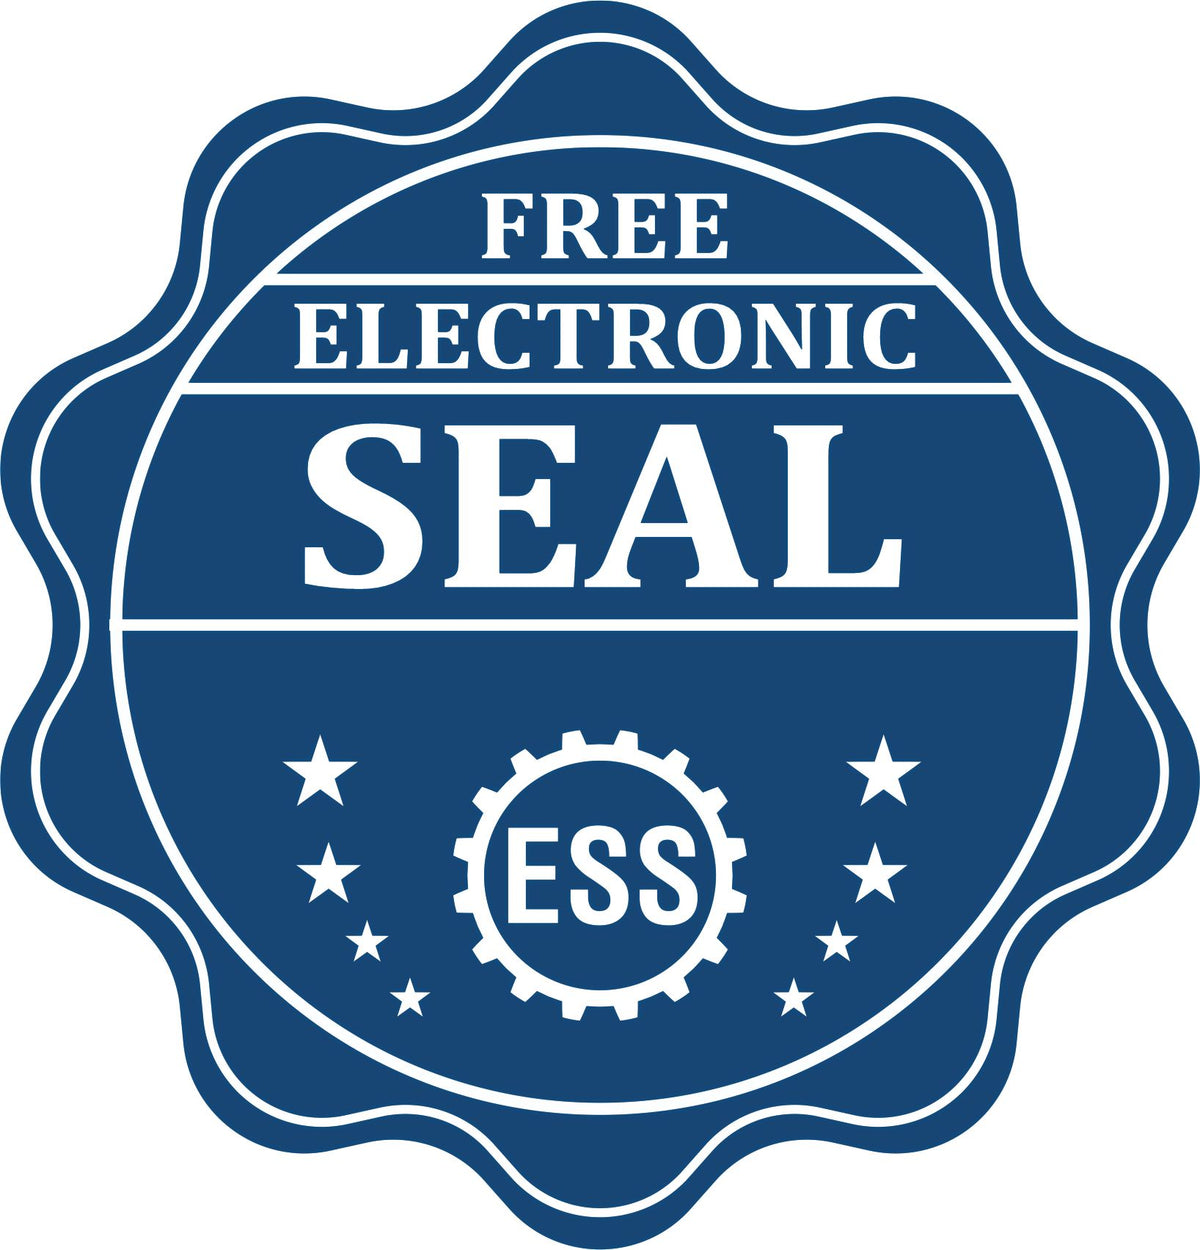 A badge showing a free electronic seal for the Gift New Hampshire Geologist Seal with stars and the ESS gear on the emblem.